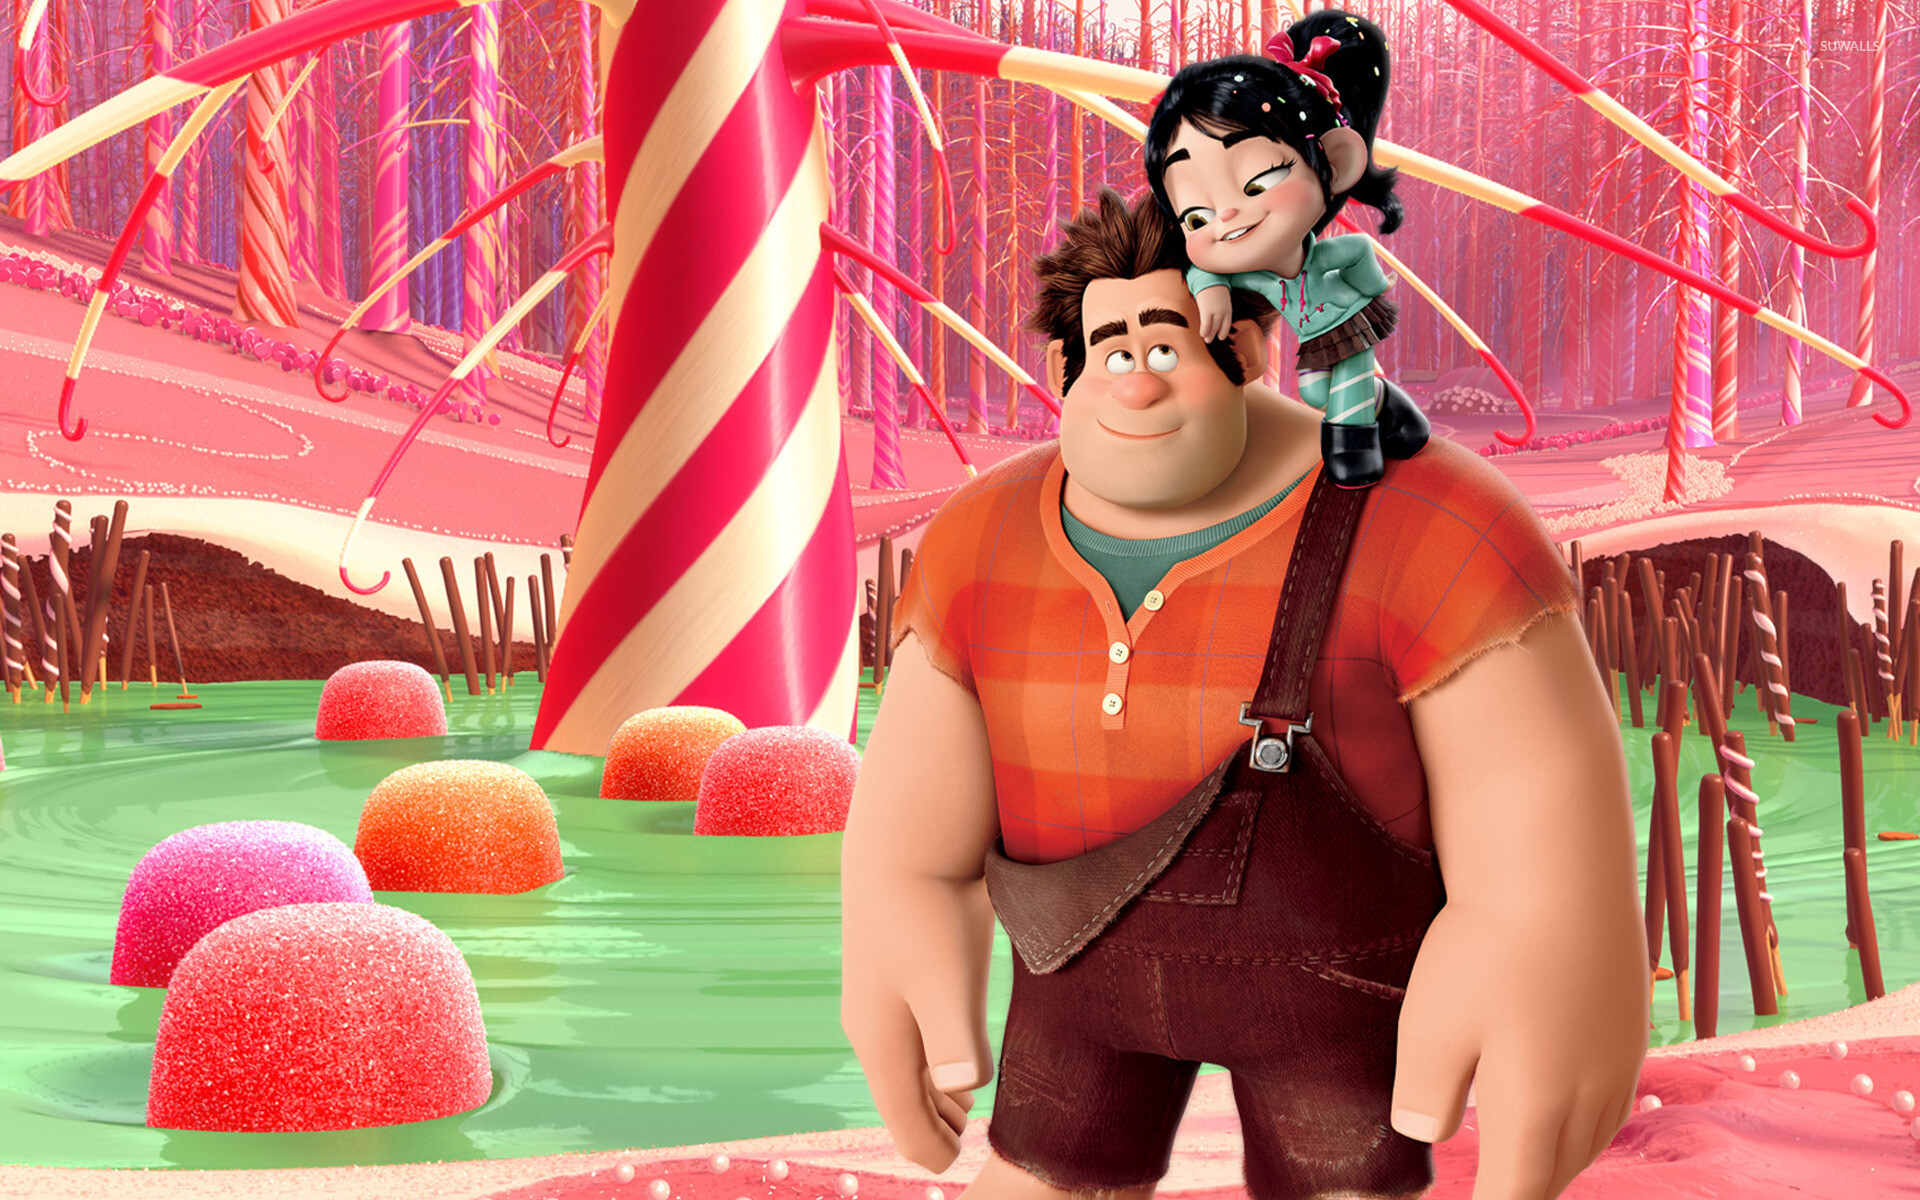 Wreck-It Ralph: After 30 years of doing the same job and receiving no recognition, he embarked on a game-jumping adventure across Litwak's Arcade in hopes of earning a medal and becoming a "good-guy". 1920x1200 HD Wallpaper.